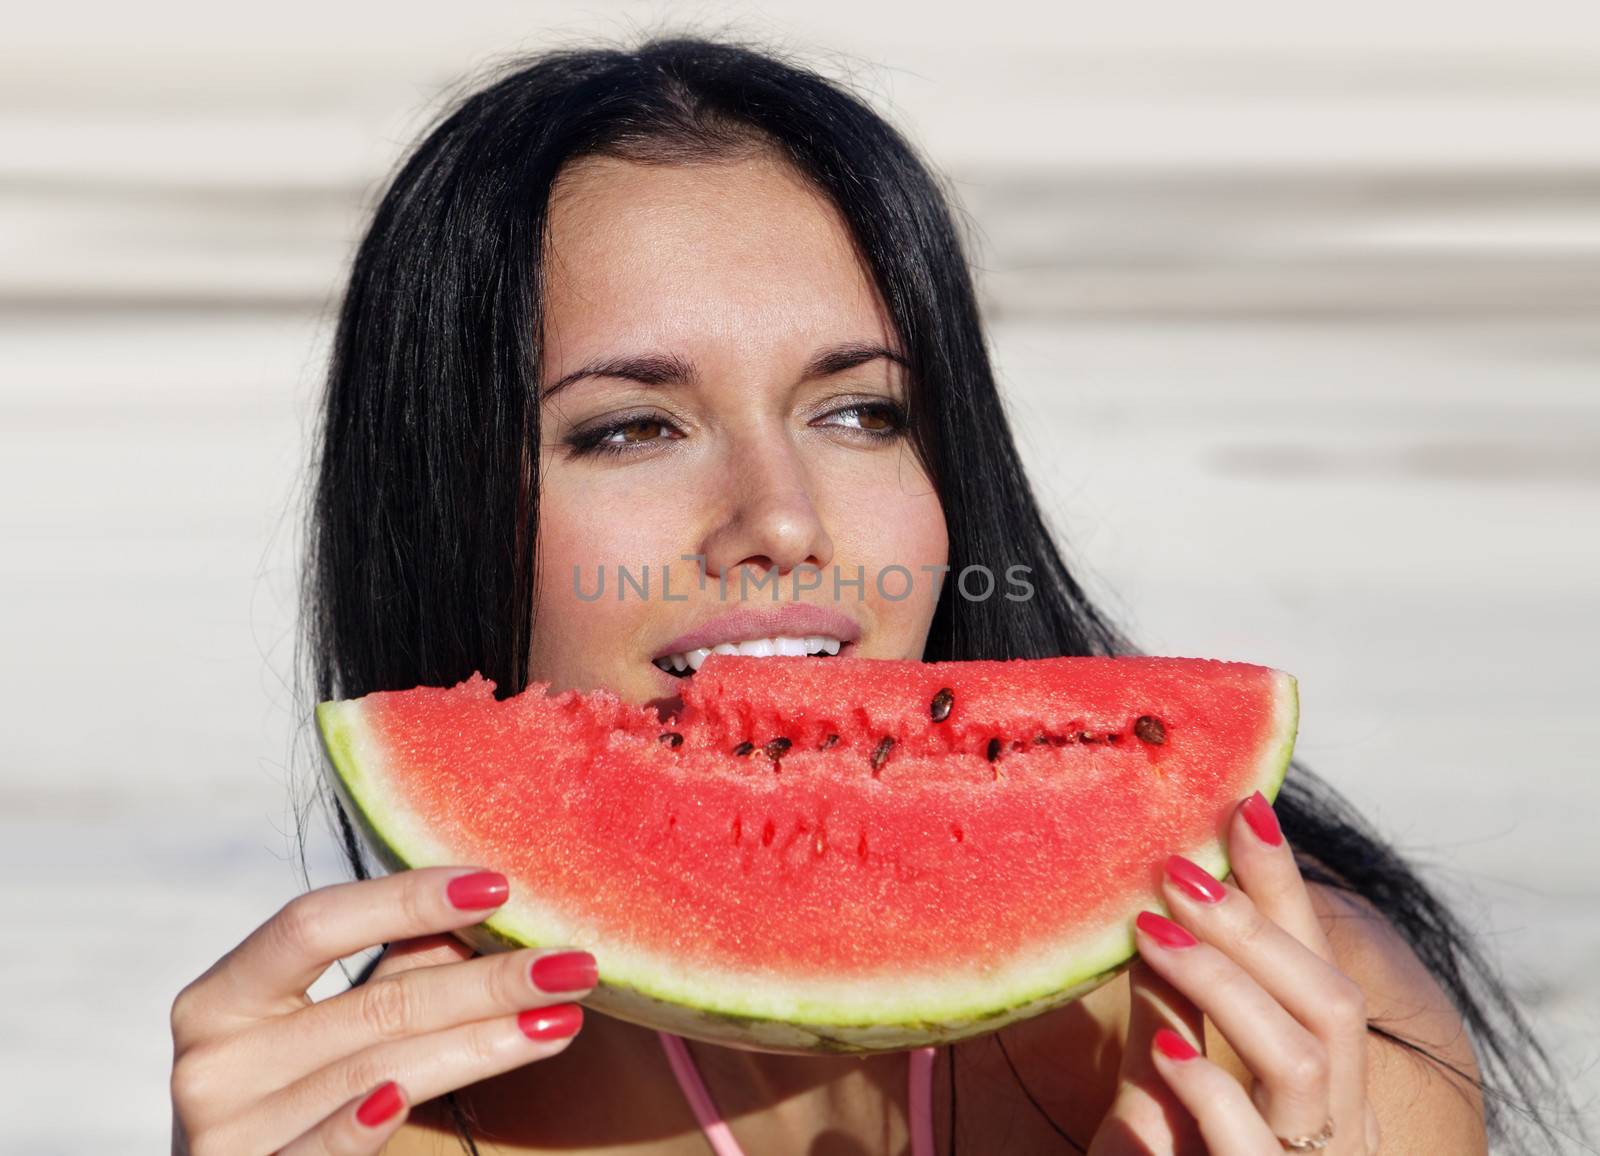 the happy girl eats a slice of ripe water-melon